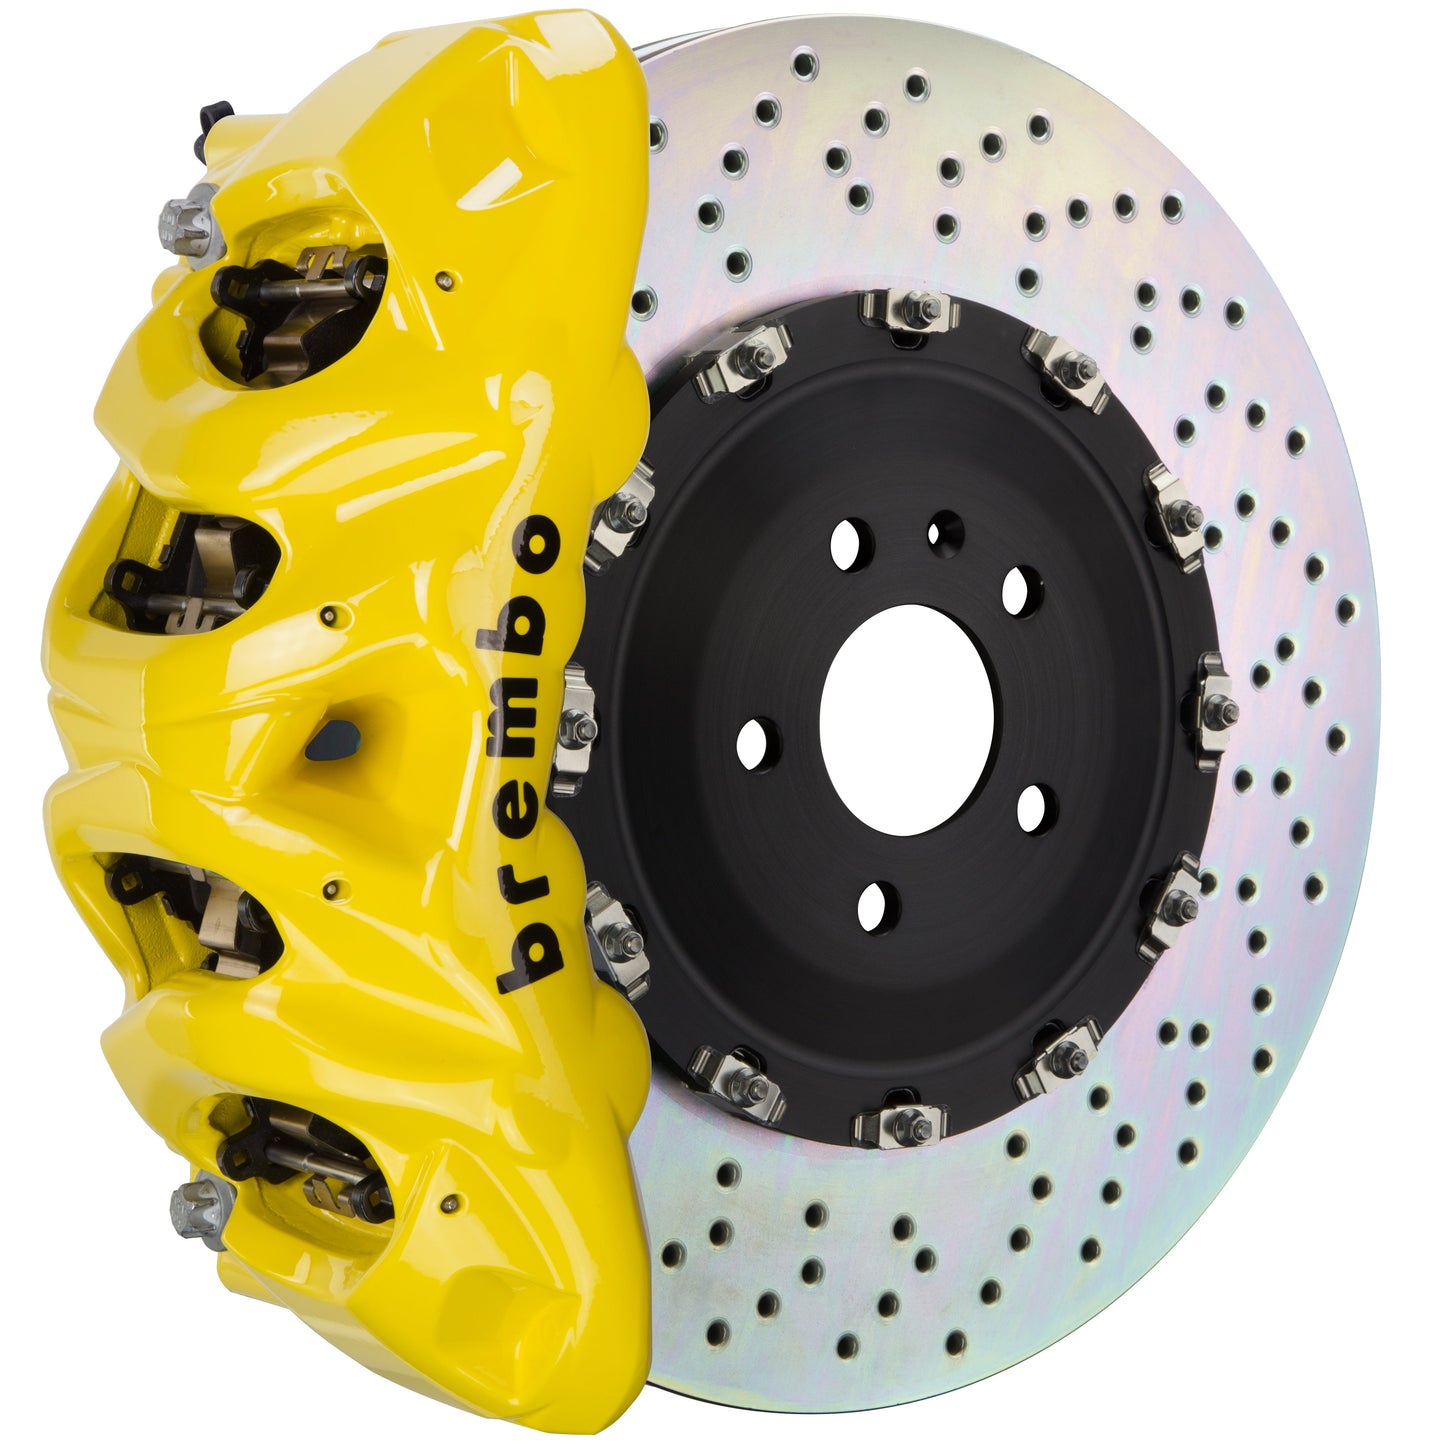 Front Brembo Gran Turismo Braking Upgrade Kit (1Q19607A) GT / BM8 Caliper with 8-Pistons & 2-piece 412x38 Disc